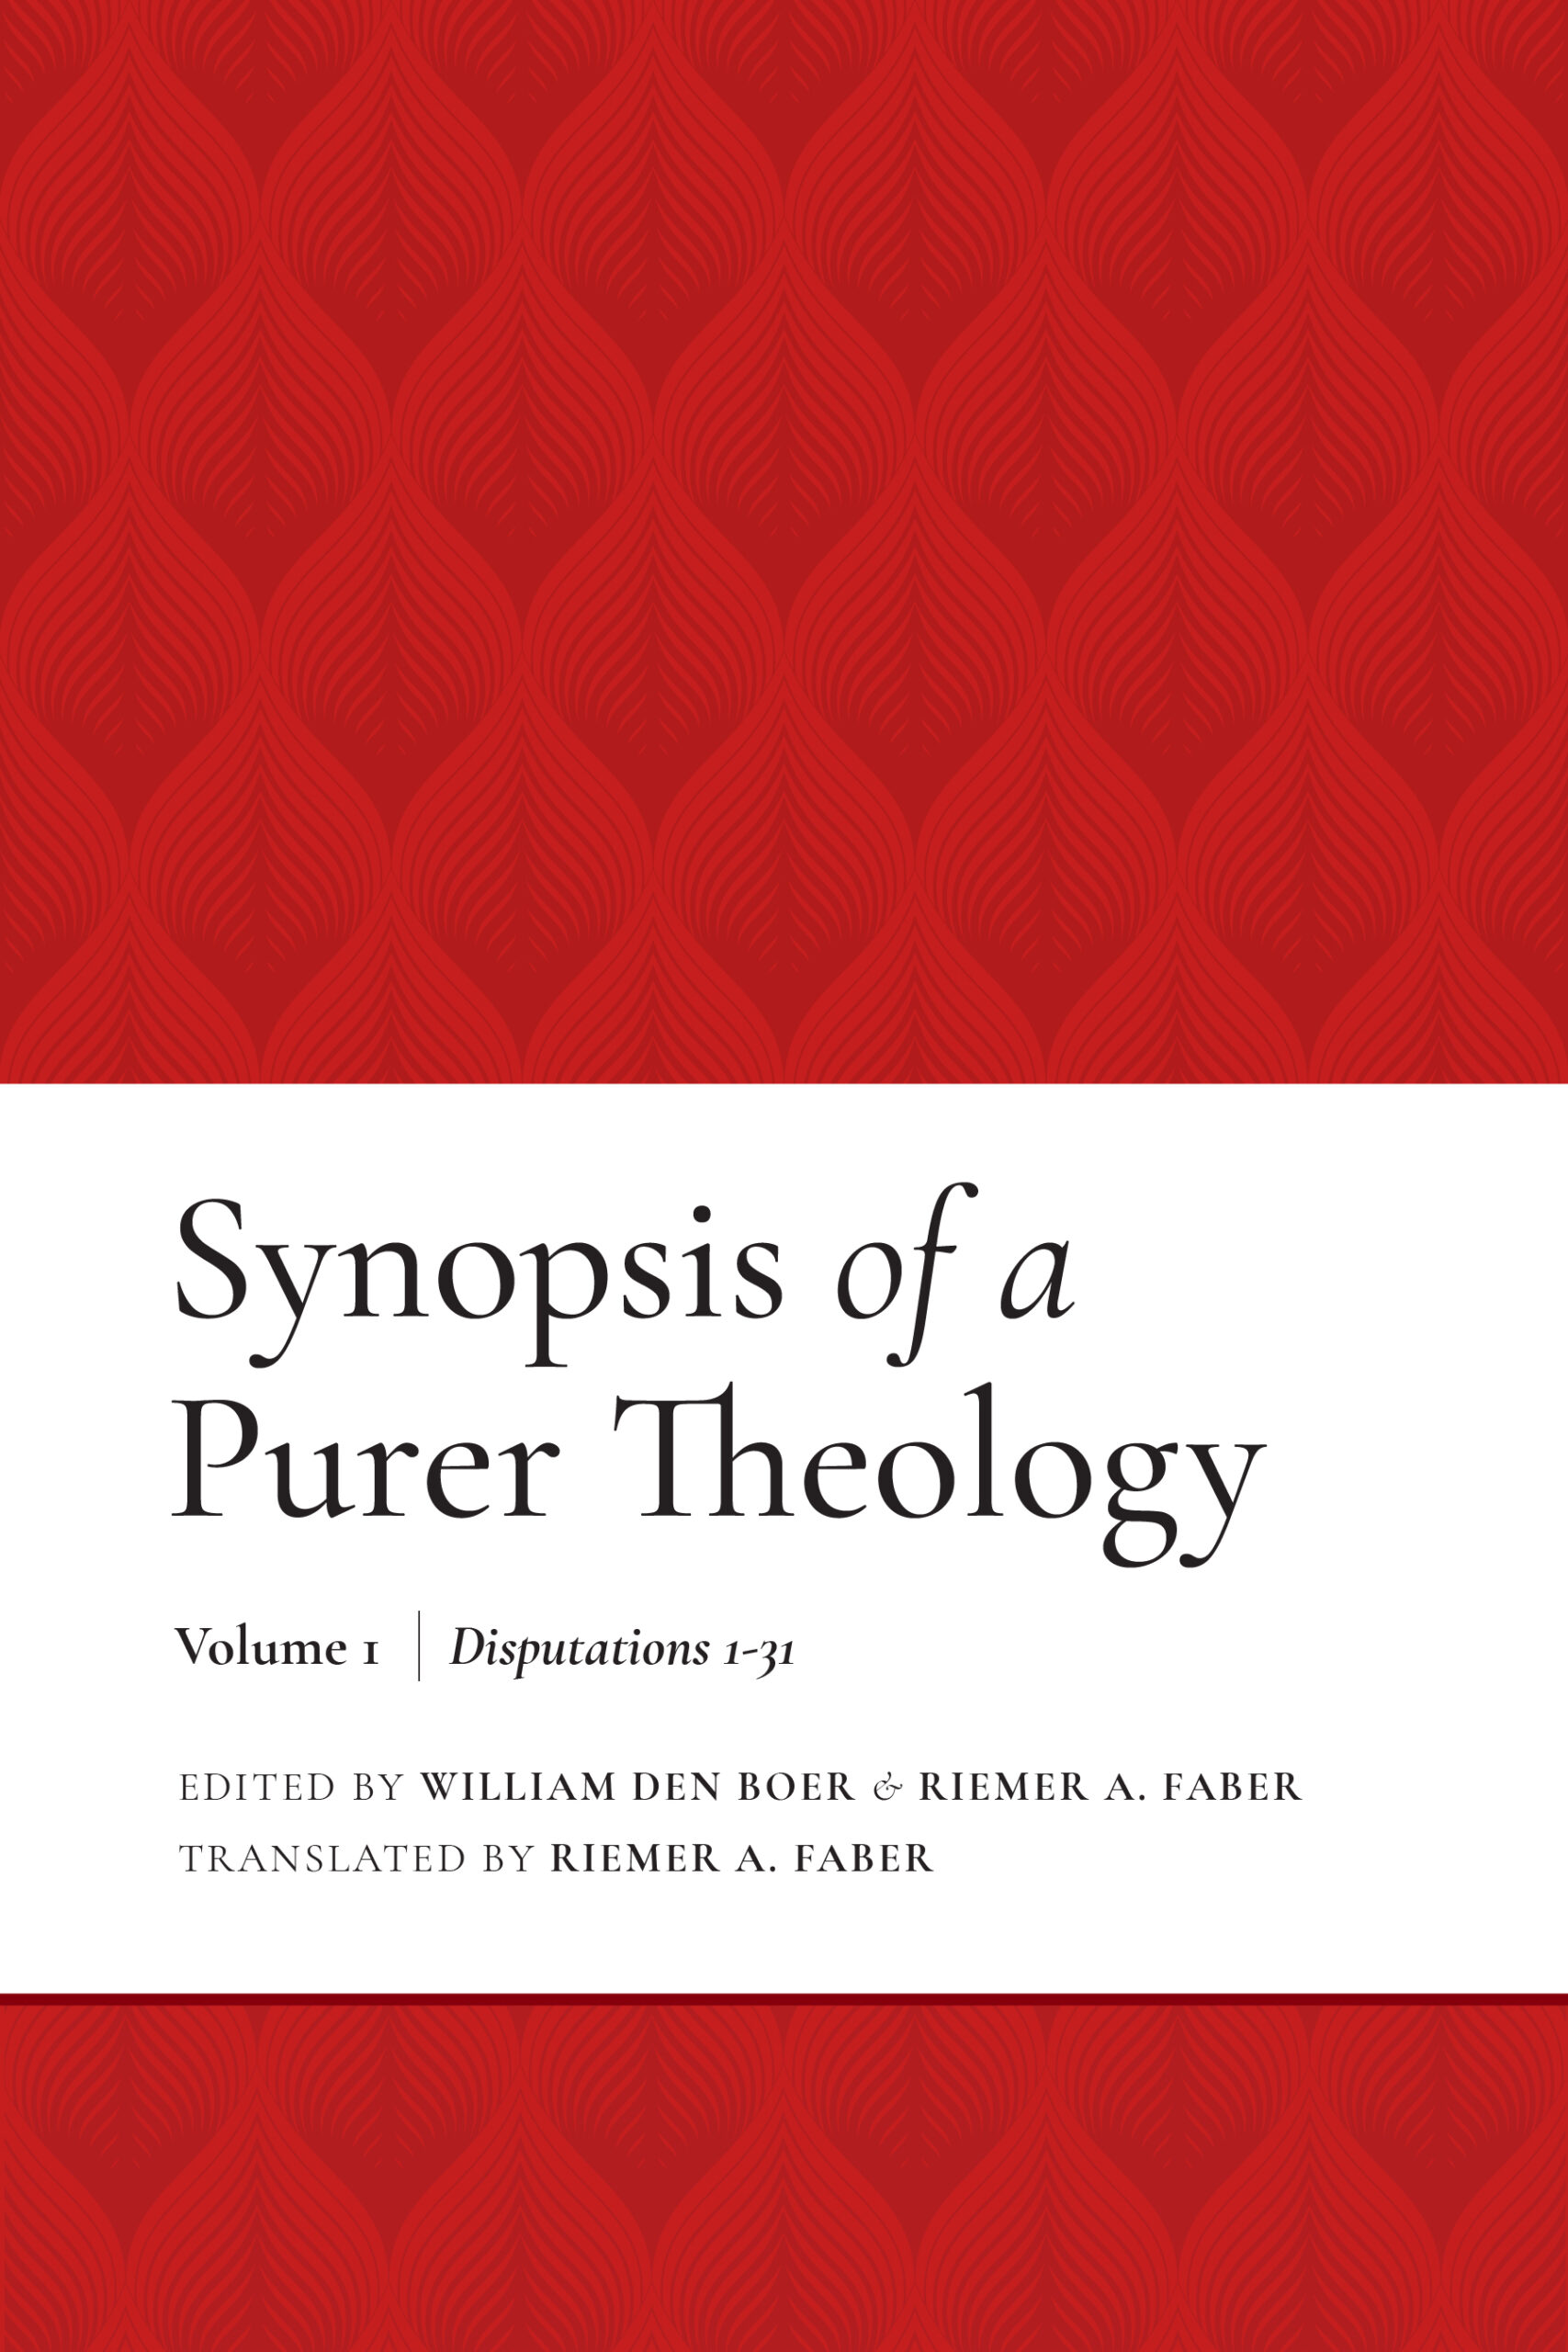 Synopsis of A Purer Theology